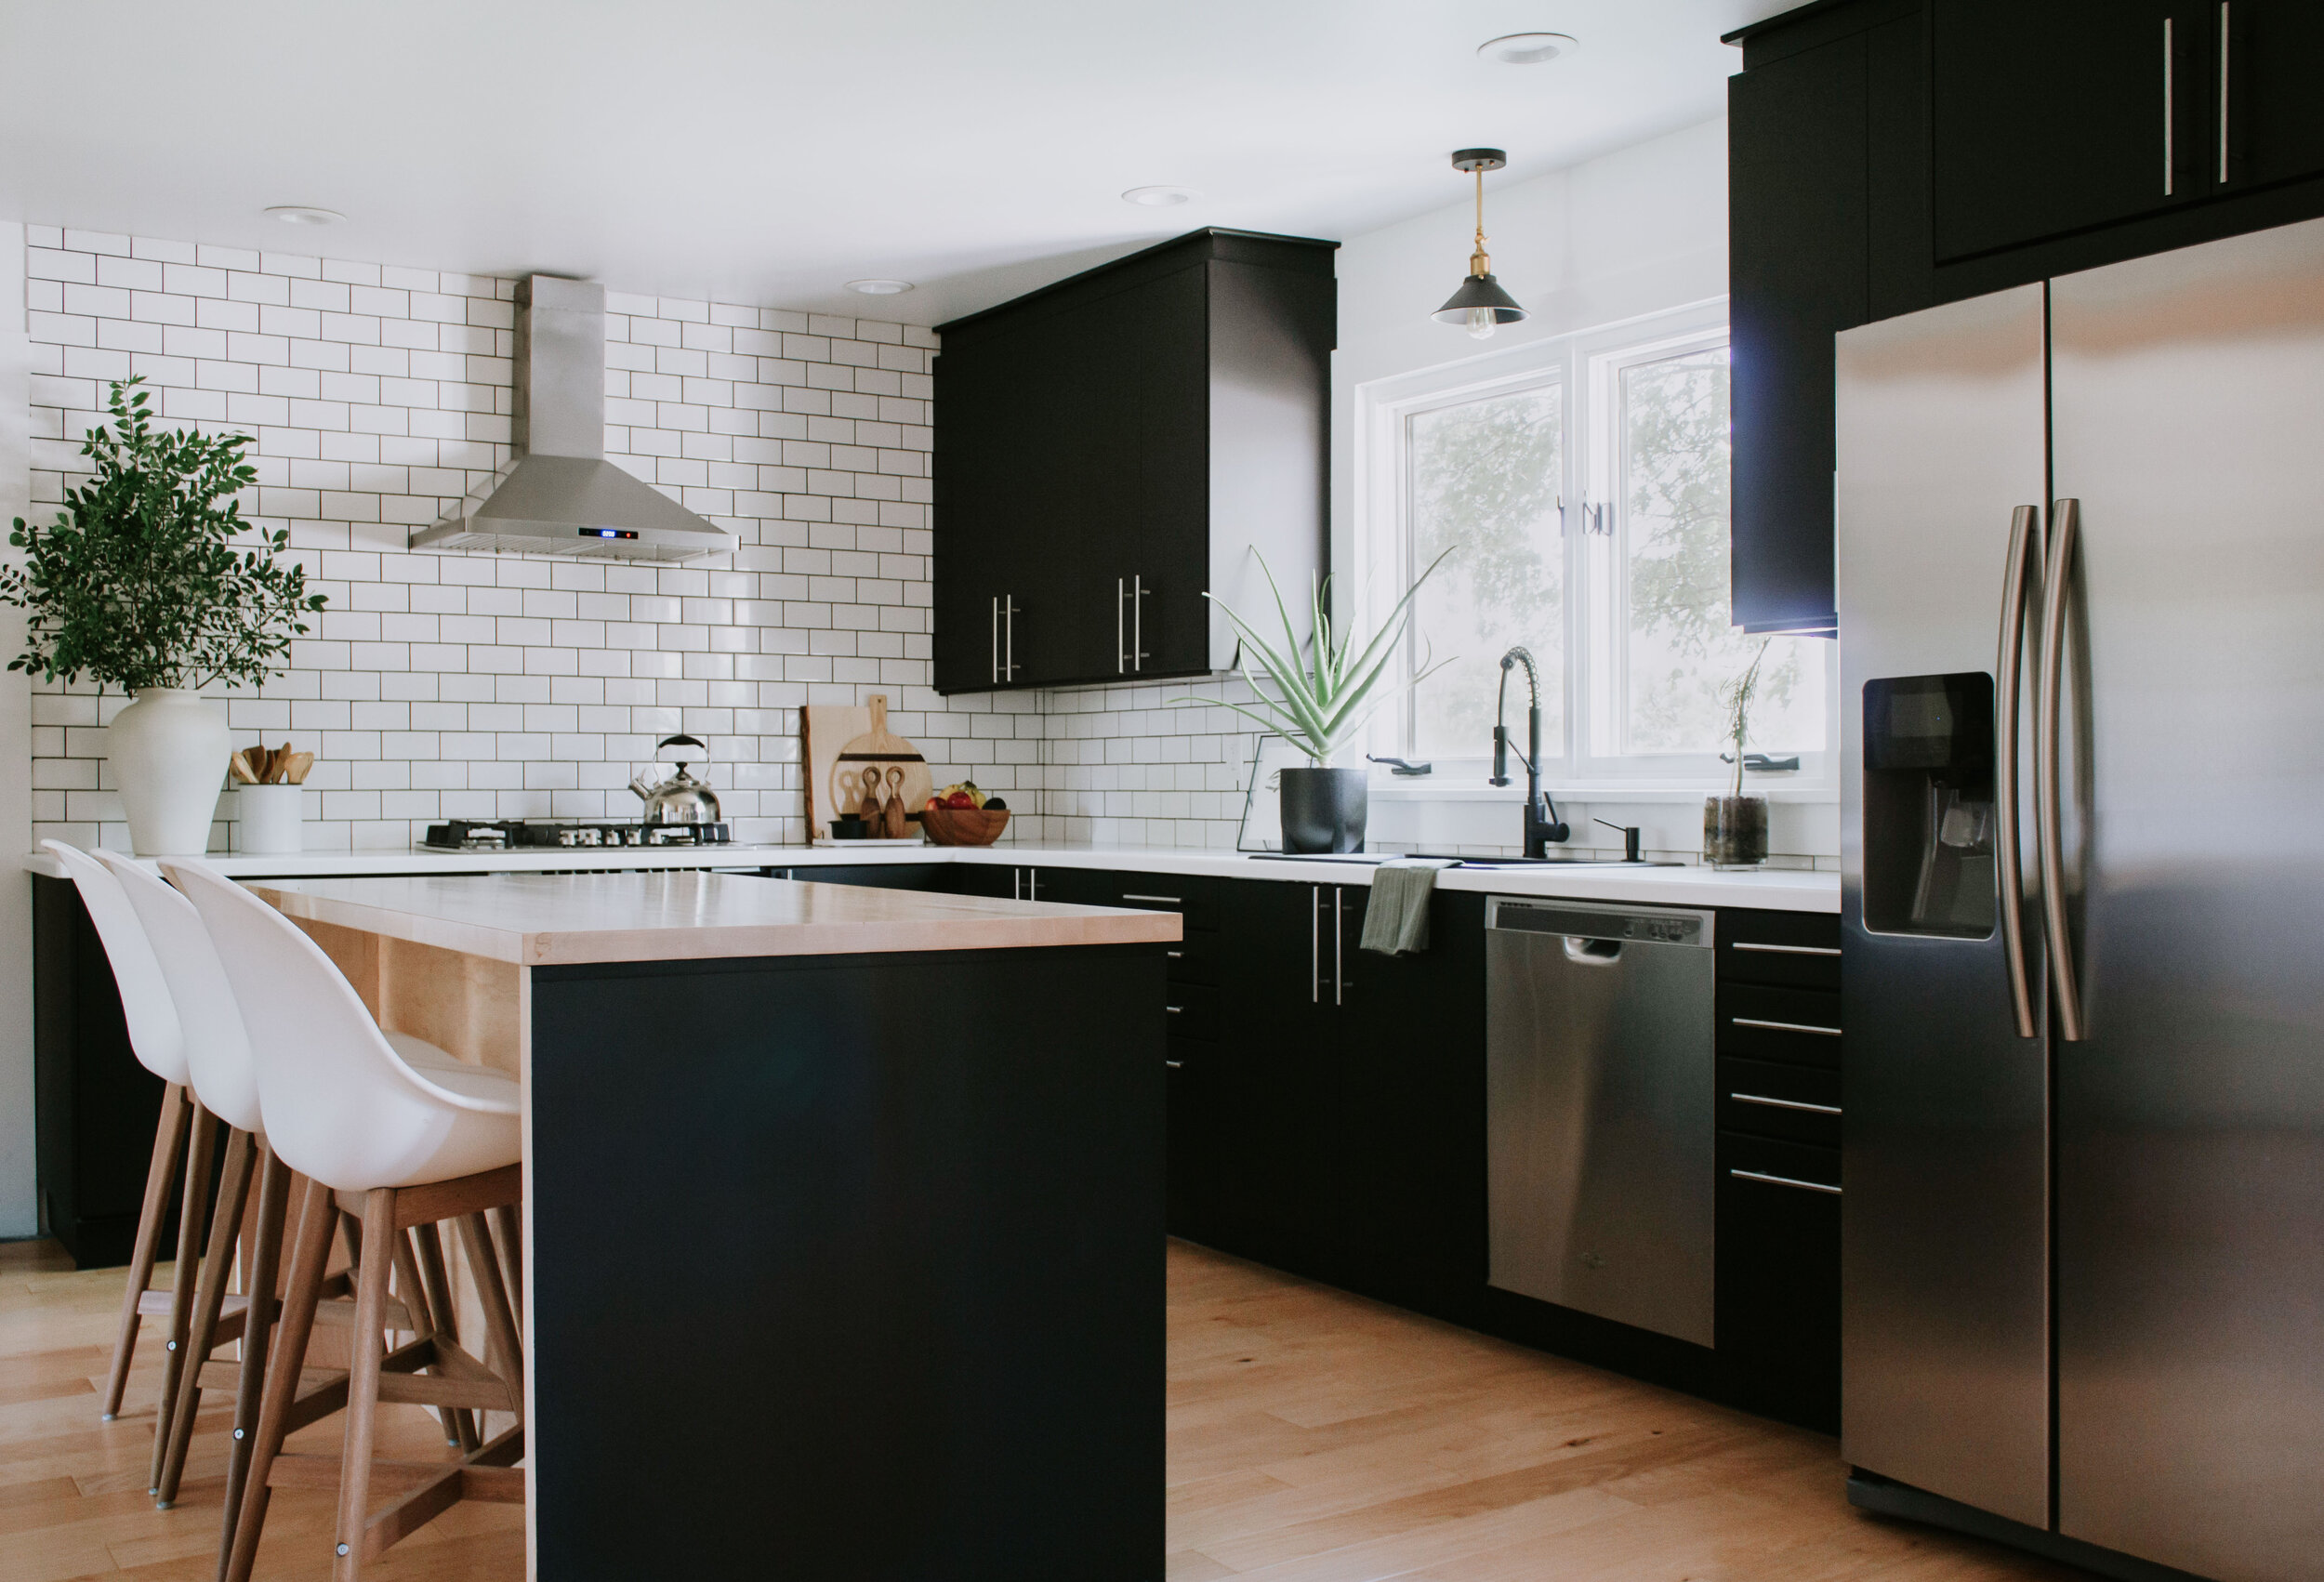 Kitchen layout tips and designer advice - use "The Kitchen Triangle" when planning a kitchen design and remodel. How to plan the positions of your major kitchen appliances. | Nadine Stay